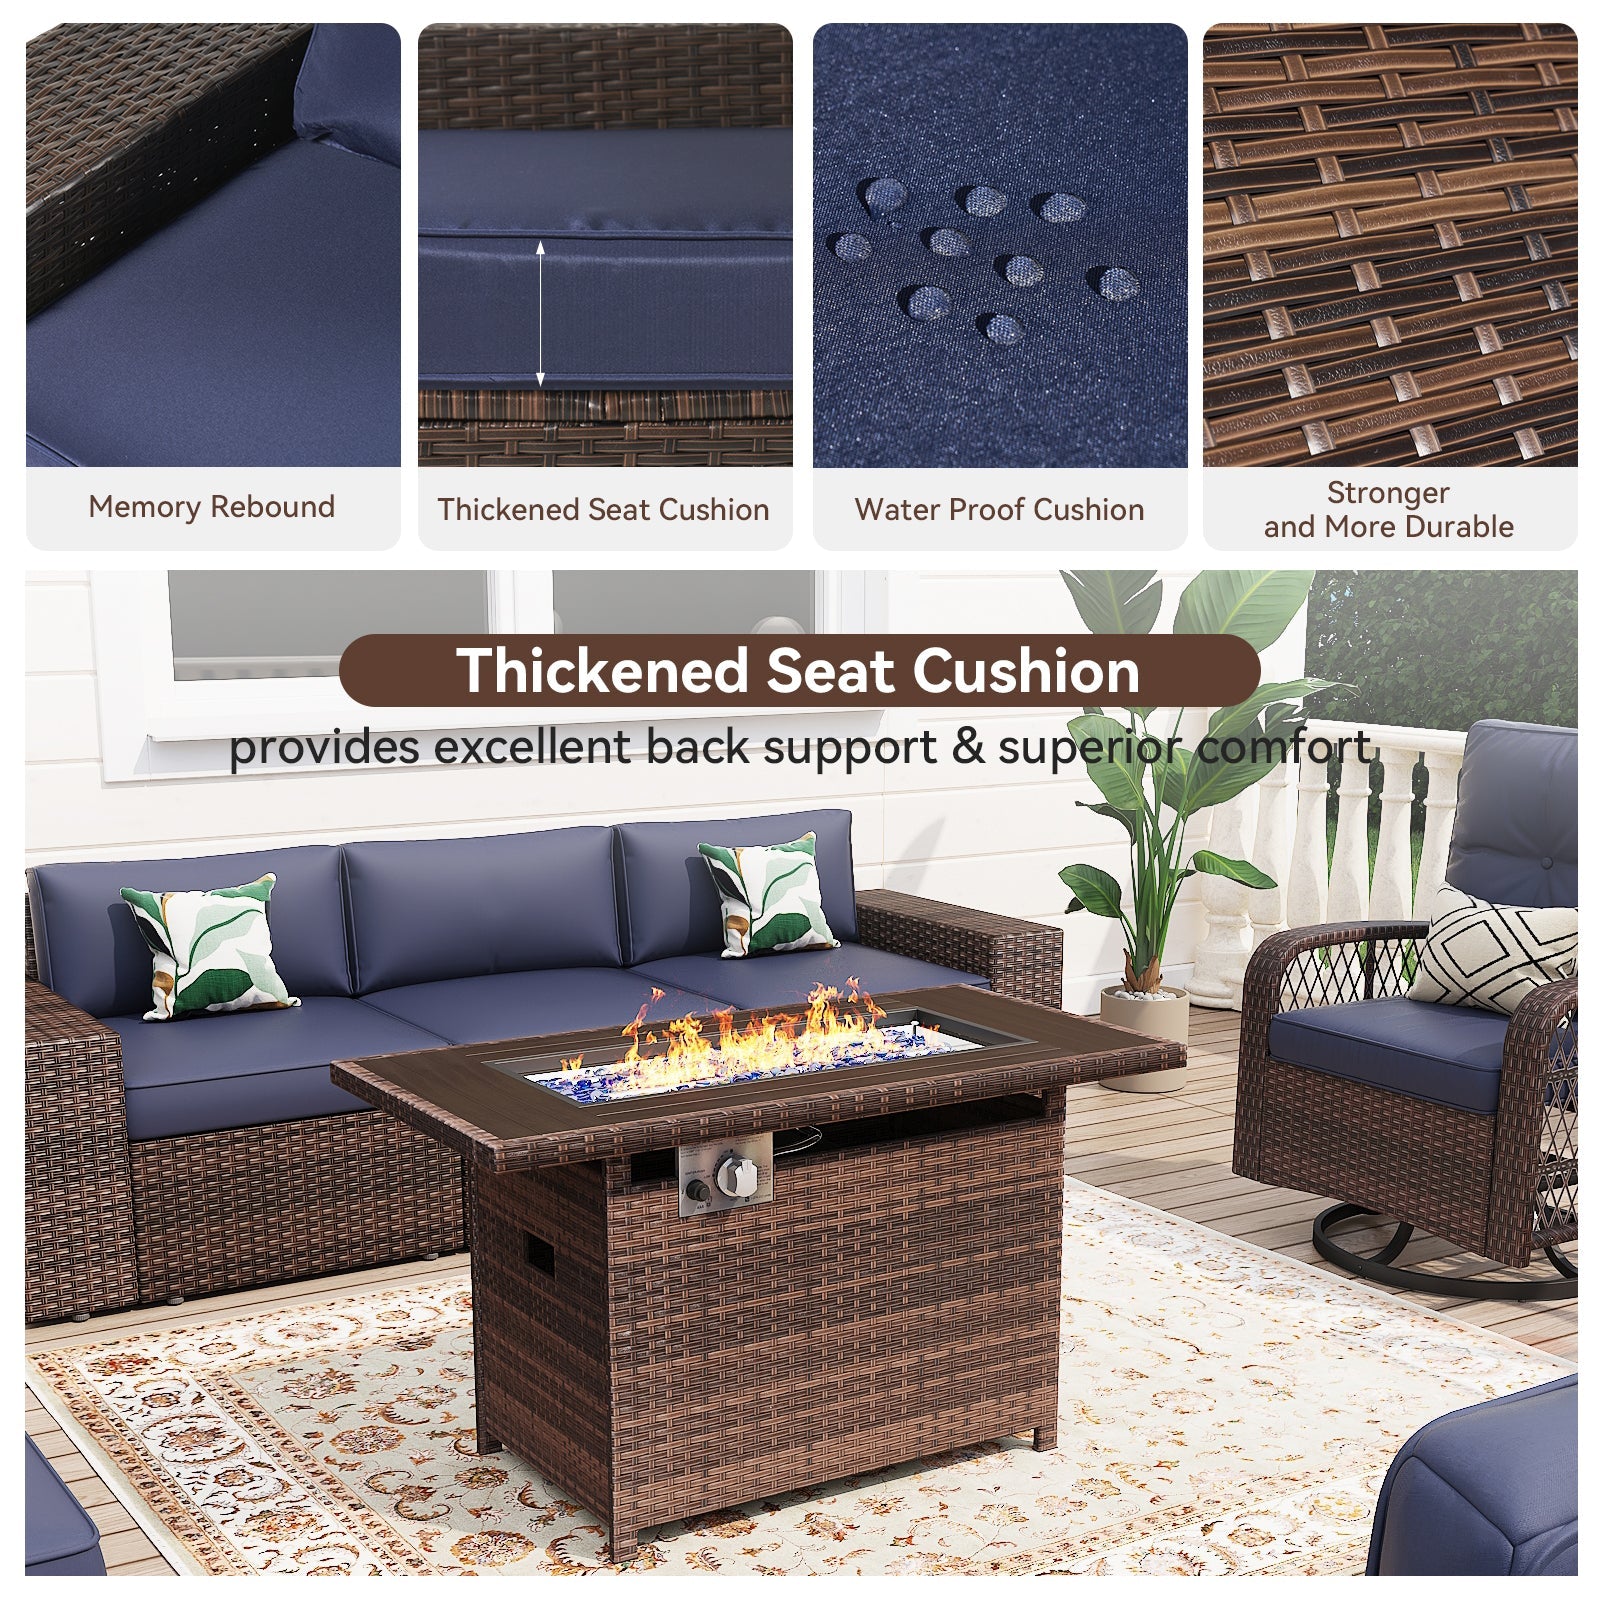 10Pcs Patio Furniture Swivel Rocker Chair Sets With Fire Pit Table All-Weather Wicker Outdoor Conversation Set Outside Rattan Sectional Sofa with Coffer Table ,Blue(with Waterproof Cover)